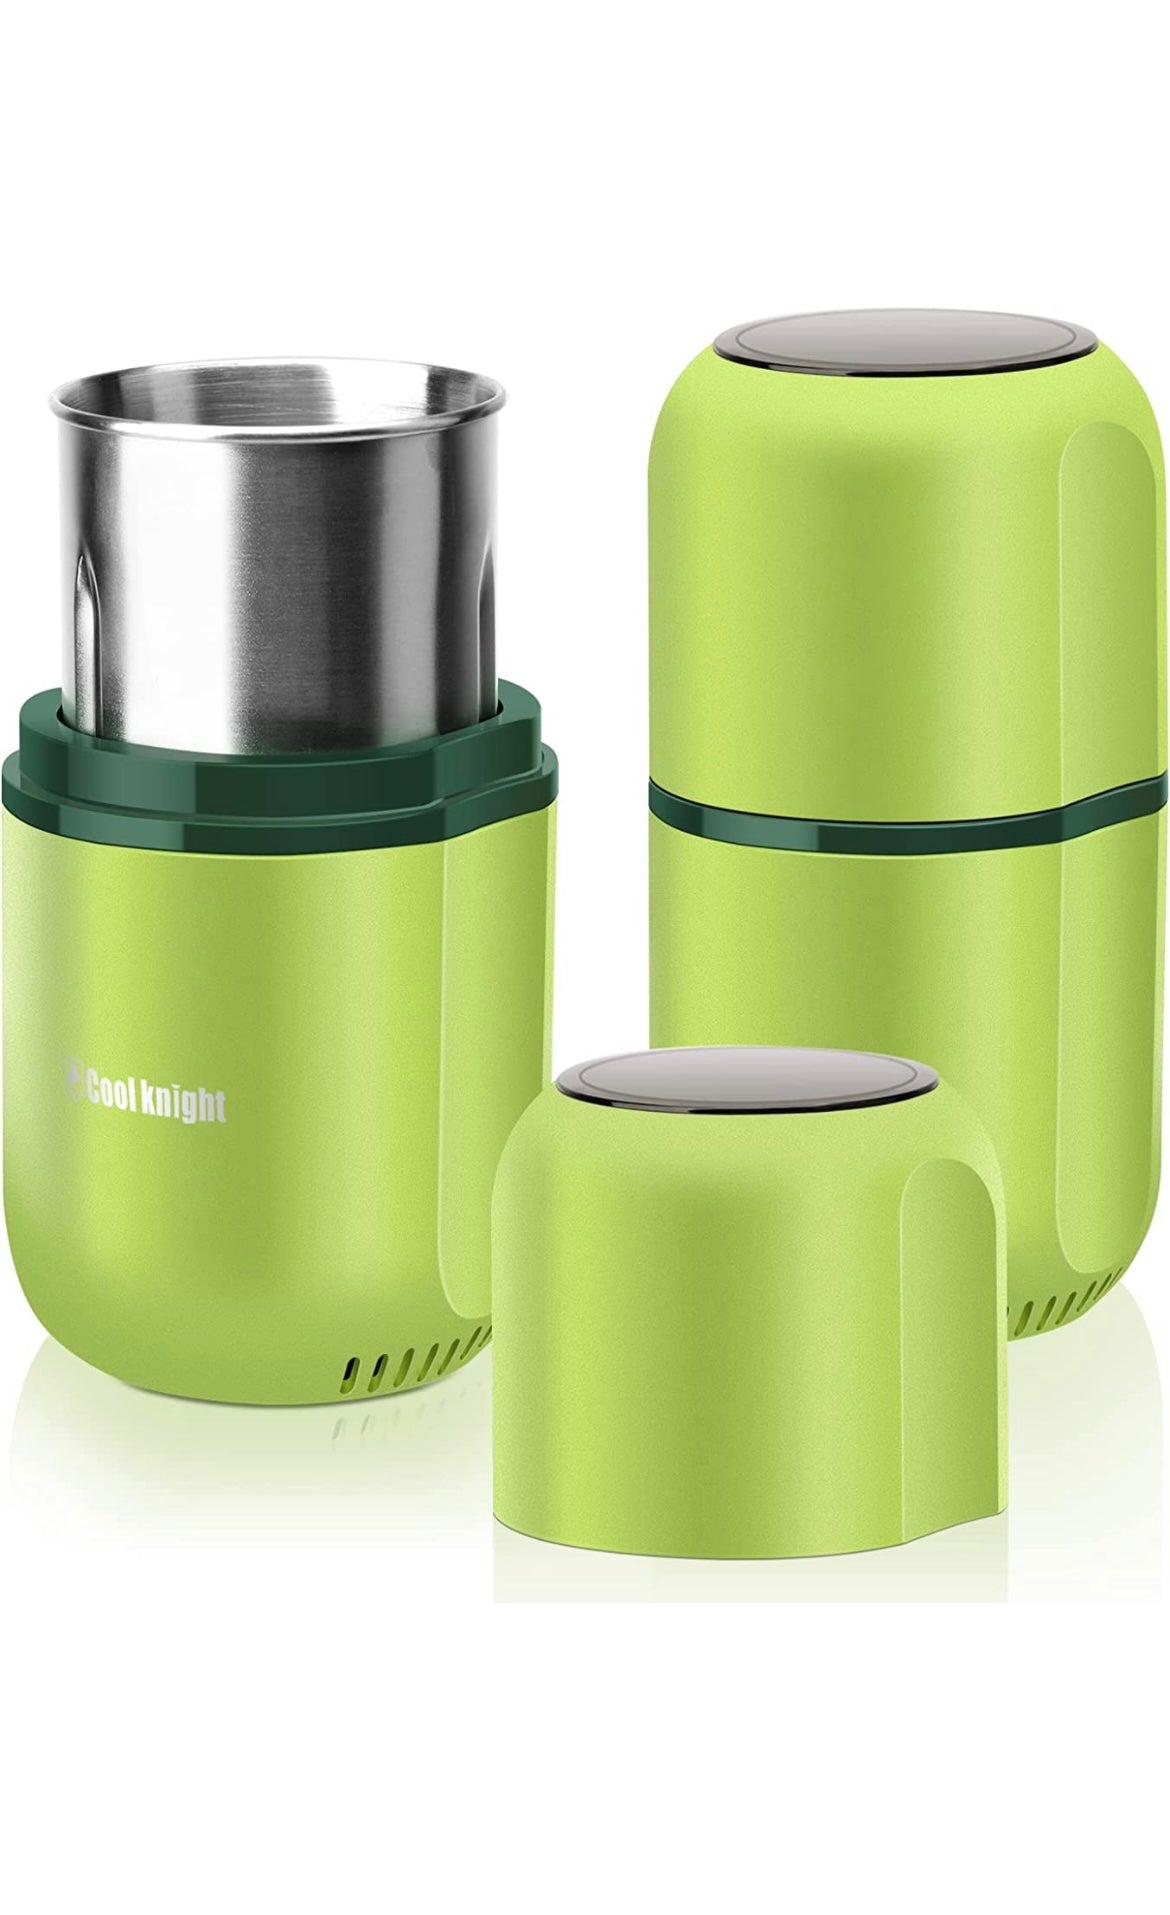 COOL KNIGHT Herb Grinder [large capacity/fast/Electric ]-Spice Herb Coffee  Grinder with Pollen Catcher/- 7.5 (Black)